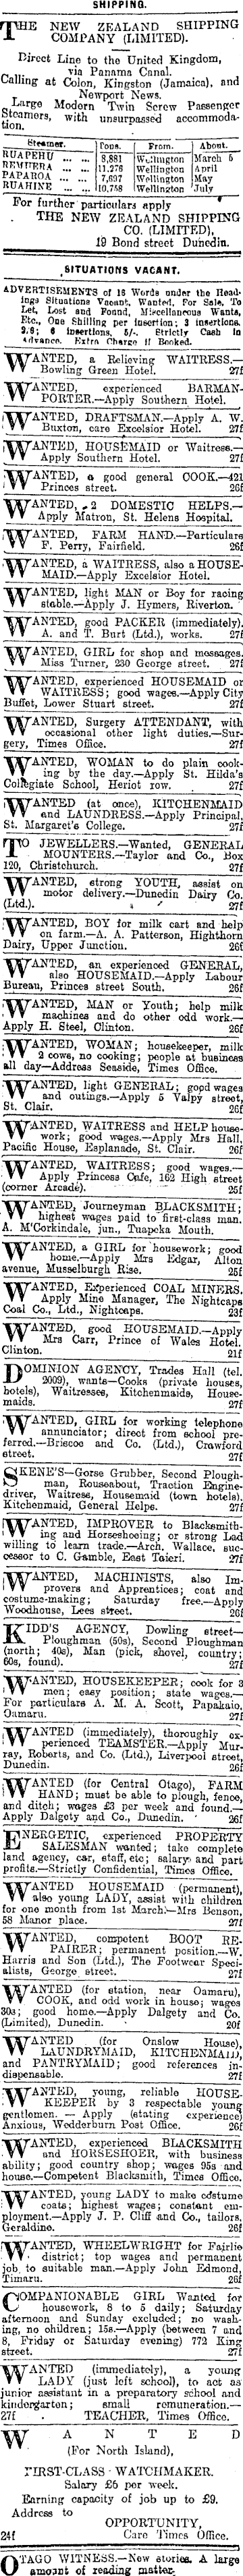 Papers Past | Newspapers | Otago Daily Times | 27 February 1920 | Page 1  Advertisements Column 3